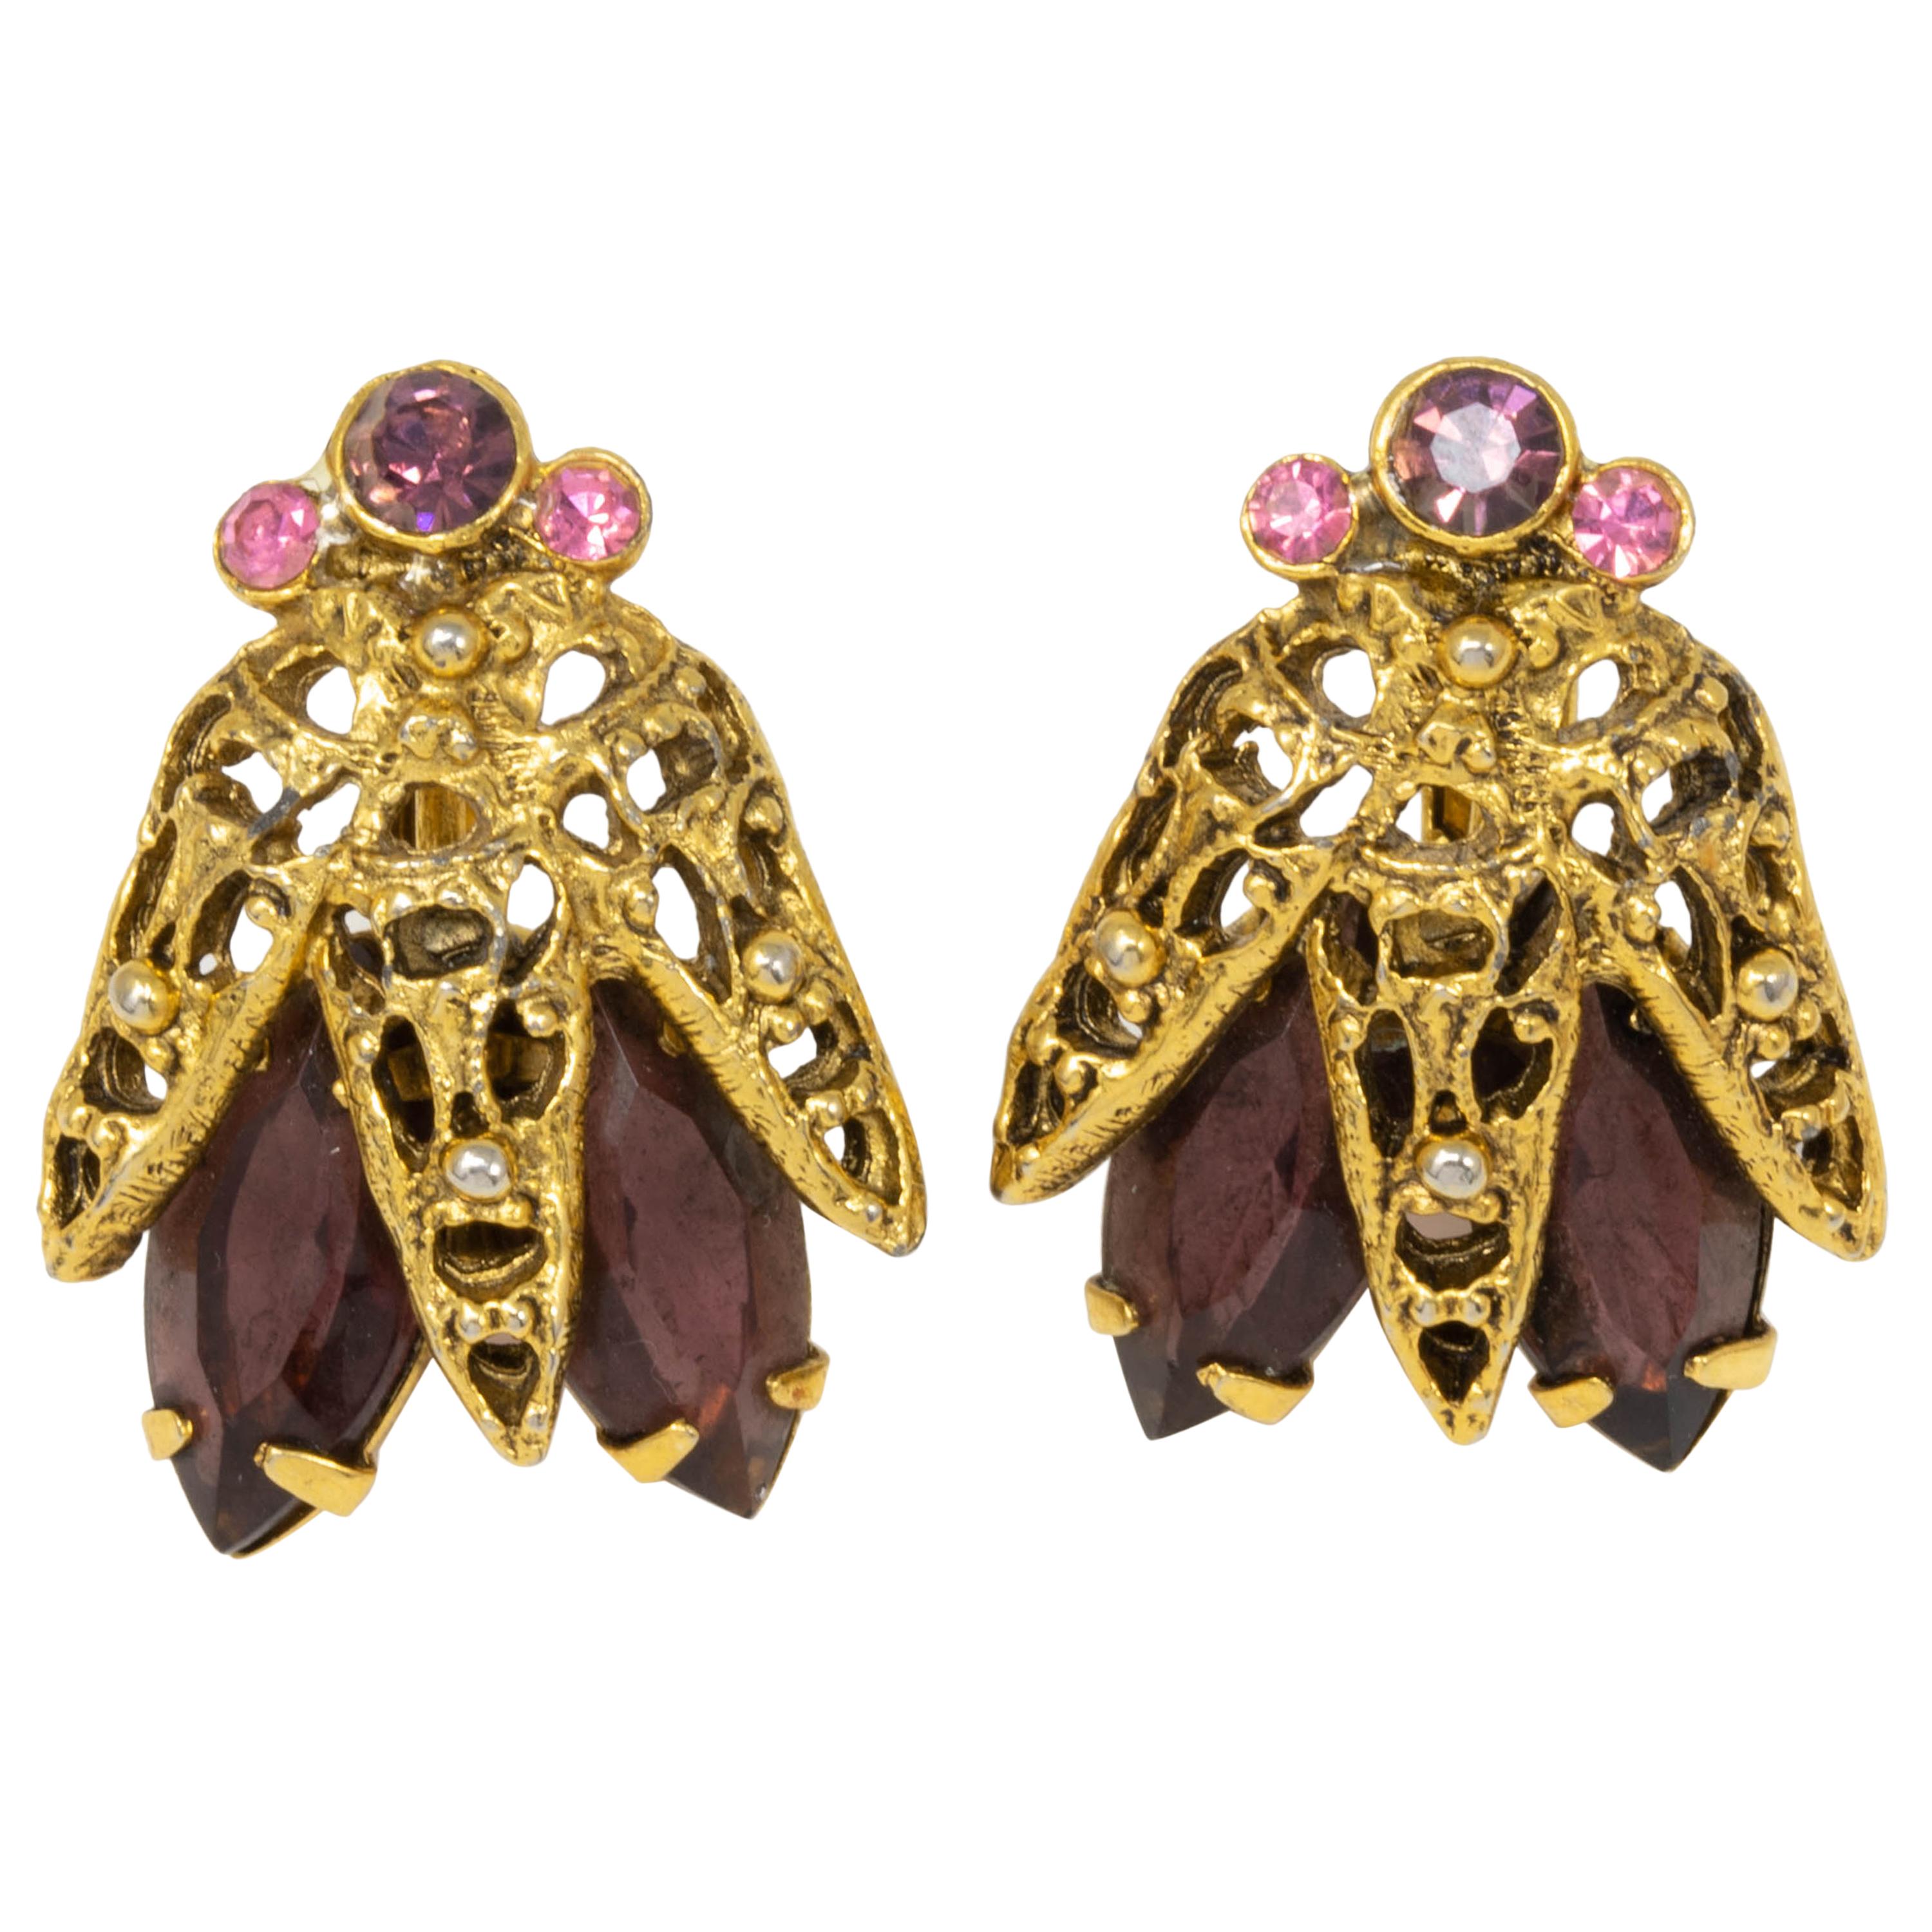 Jeweled Accented Fly Insect Clip on Earrings in Gold, with Amethyst Crystals